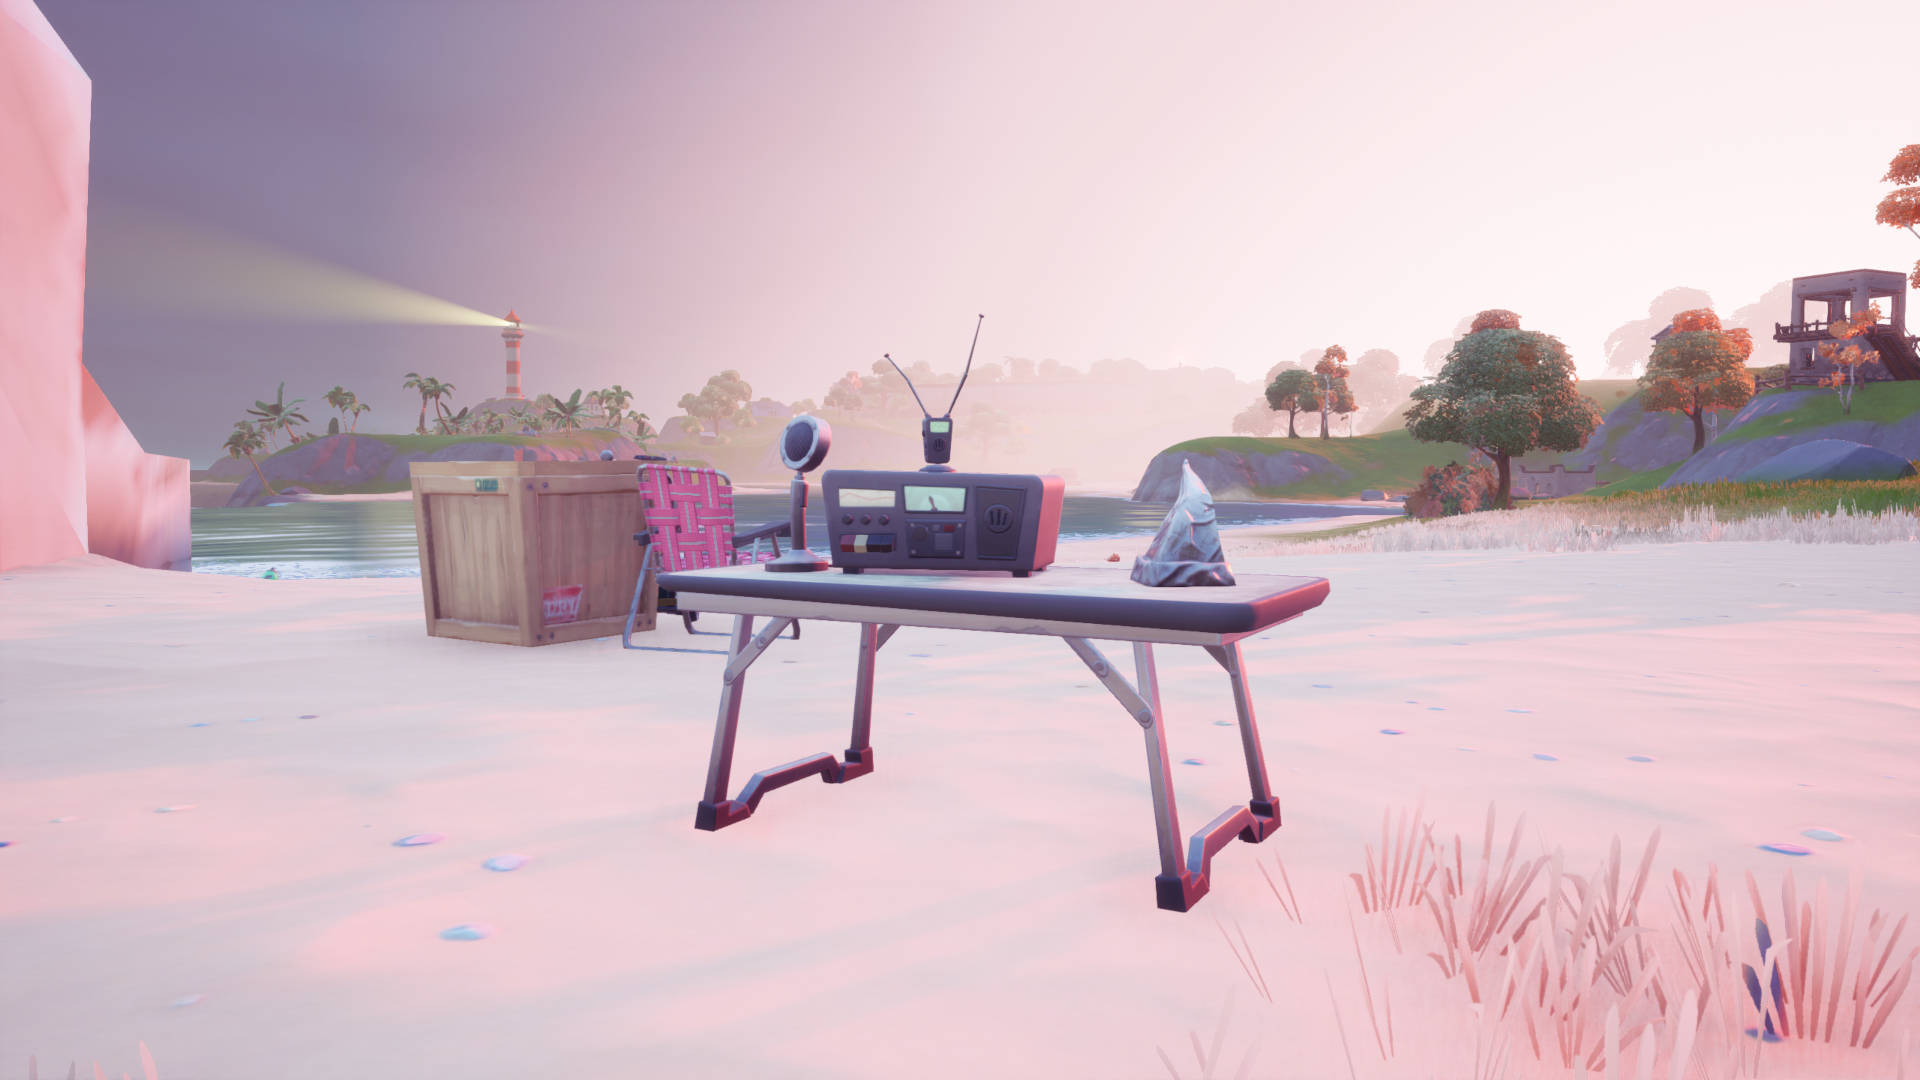 Where to interact with CB radios in Fortnite